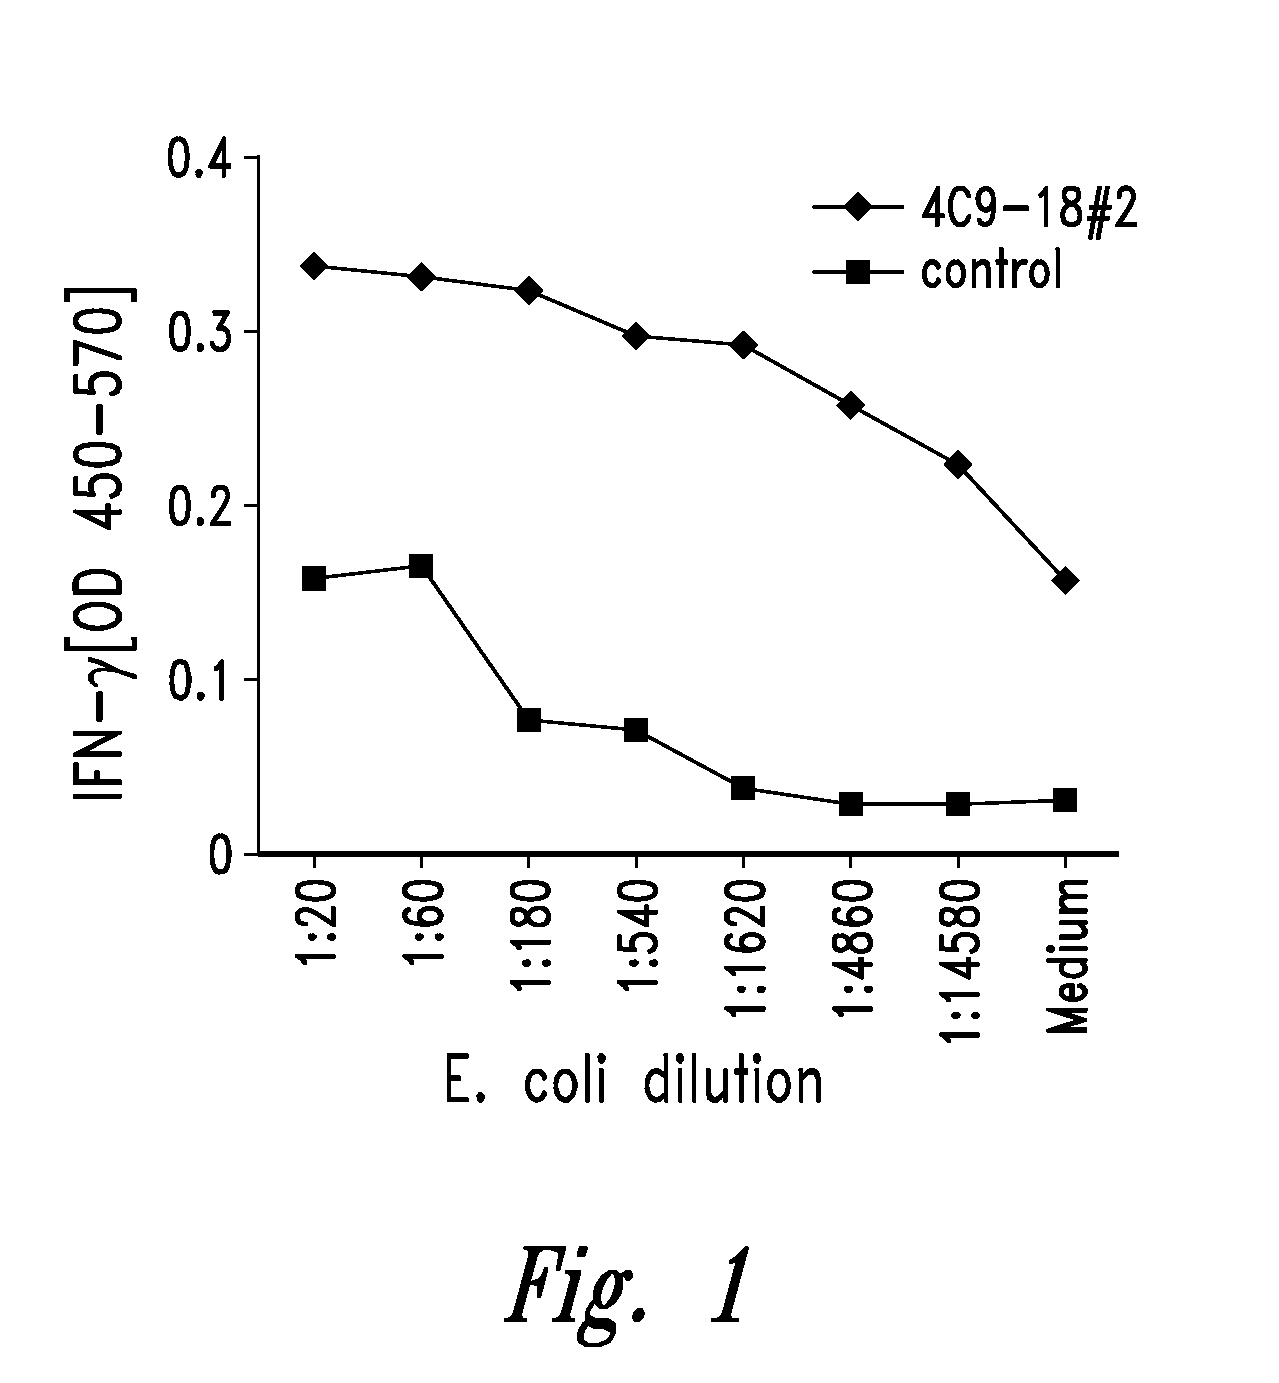 Compounds and methods for treatment and diagnosis of chlamydial infection